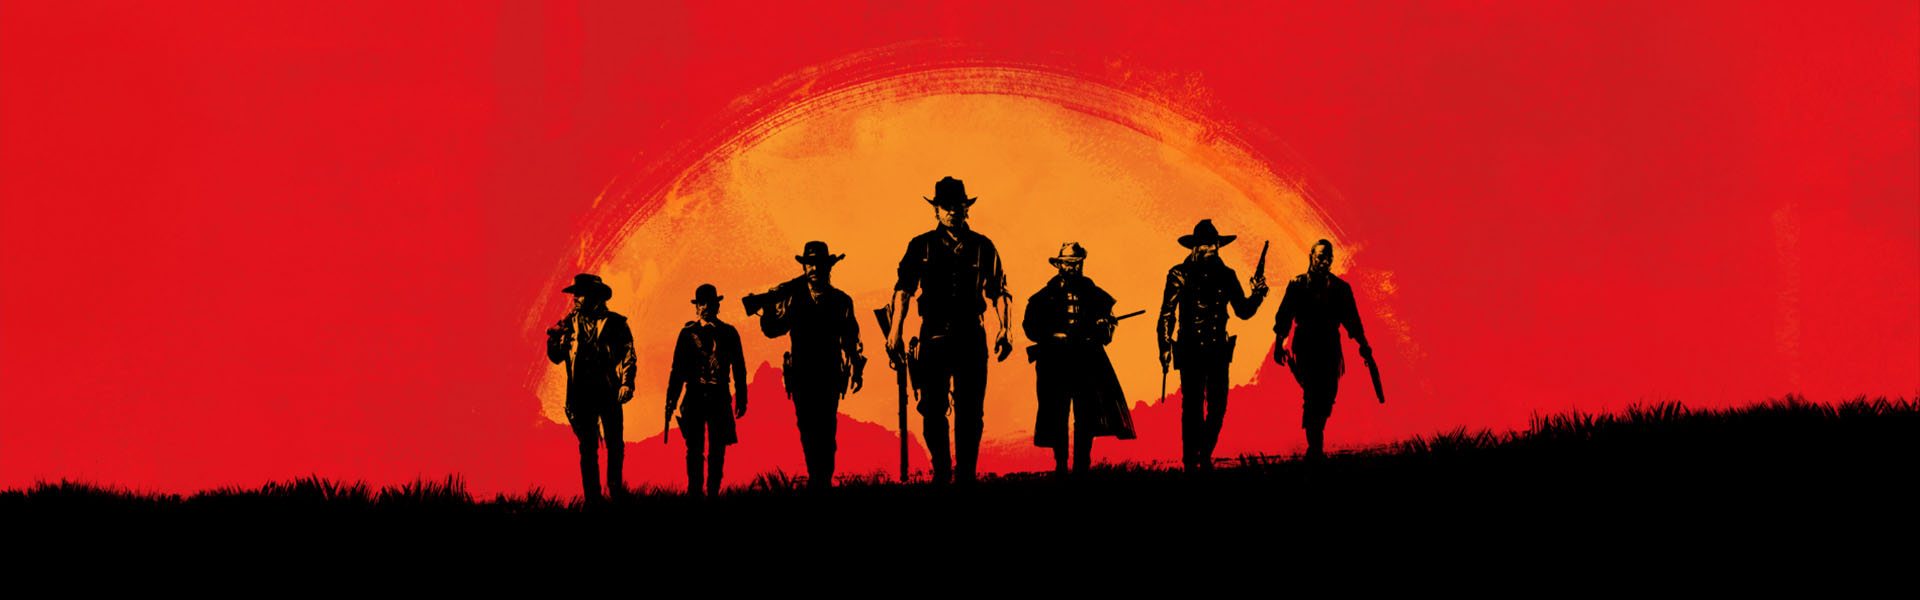 Red Dead Redemption 2 Coming Fall 2017 18